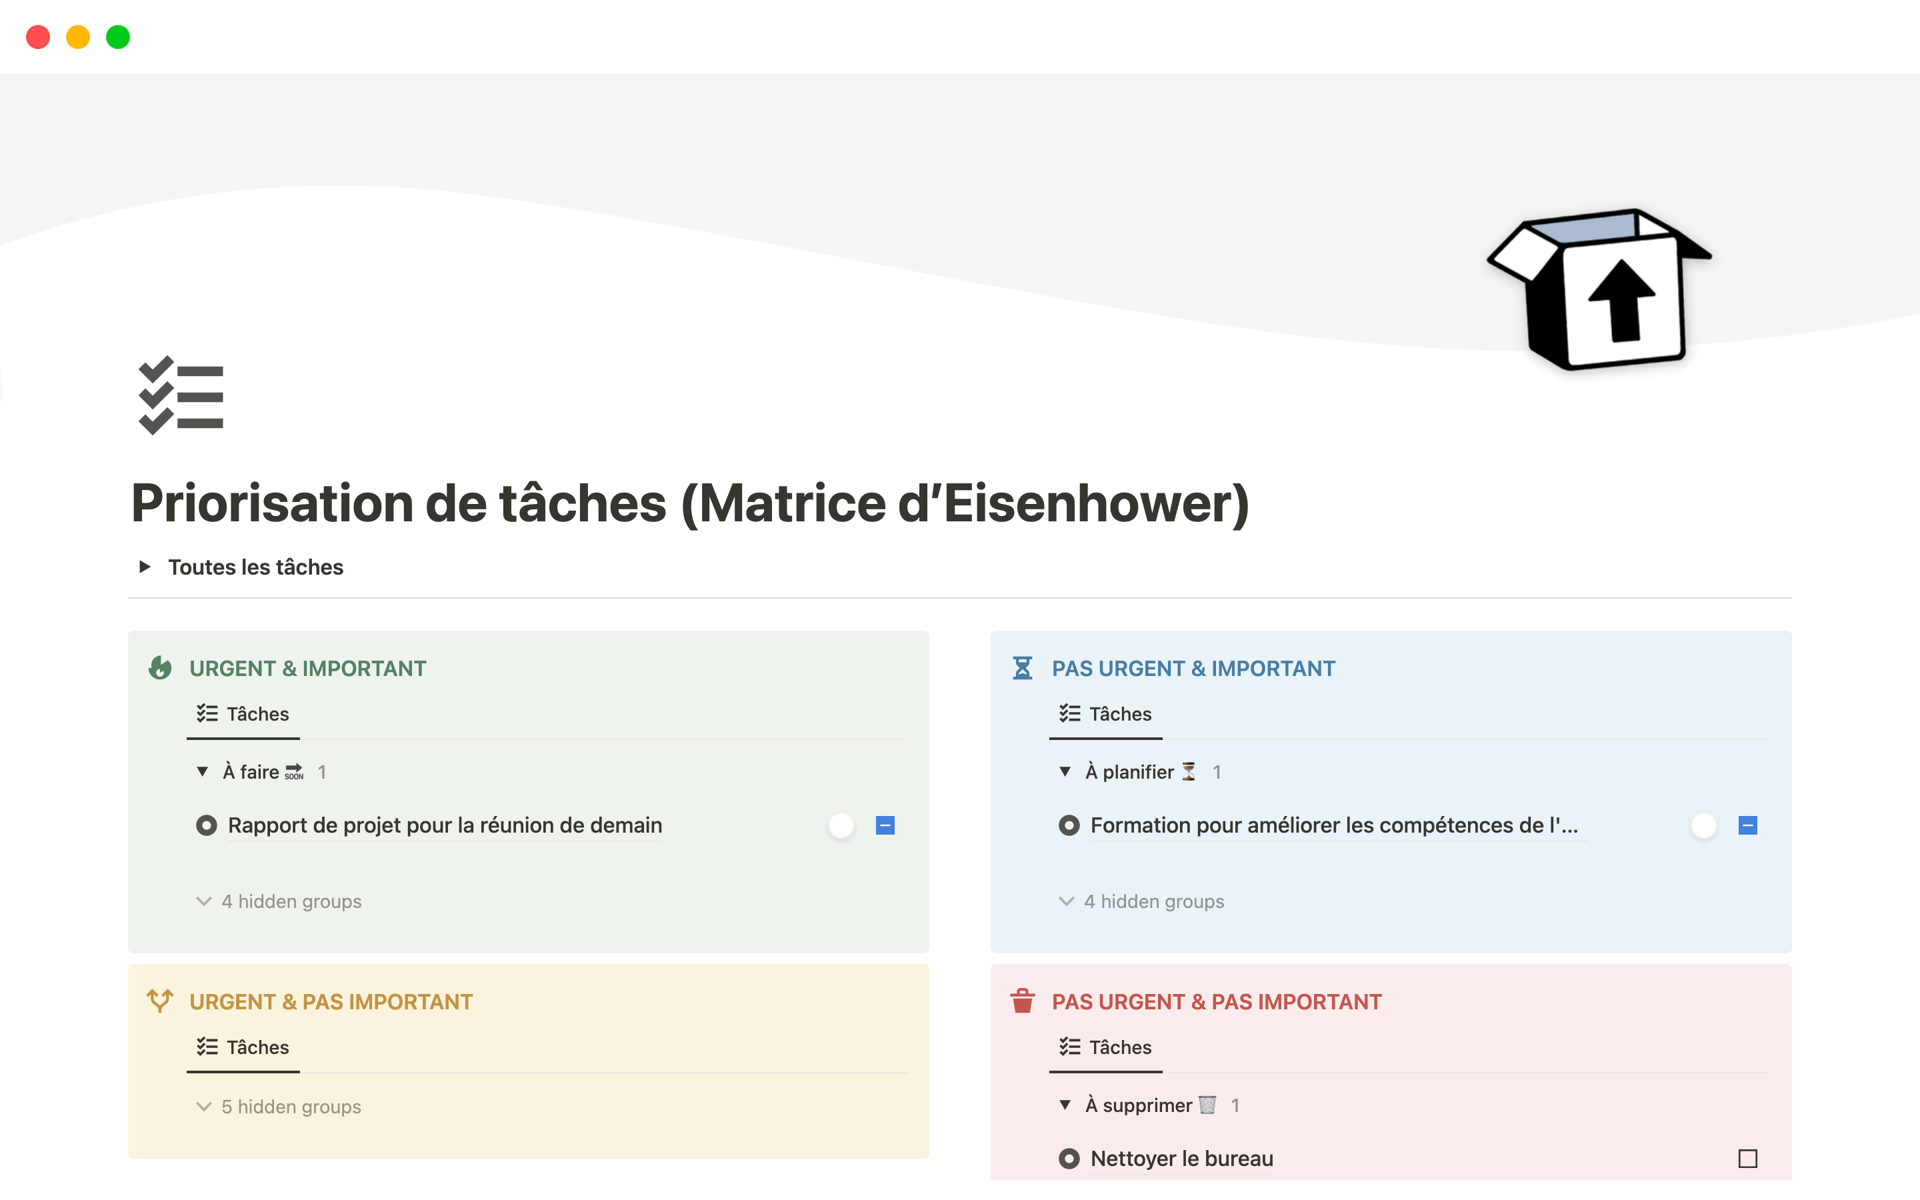 A template preview for Matrice d’Eisenhower - Priorisation de tâches